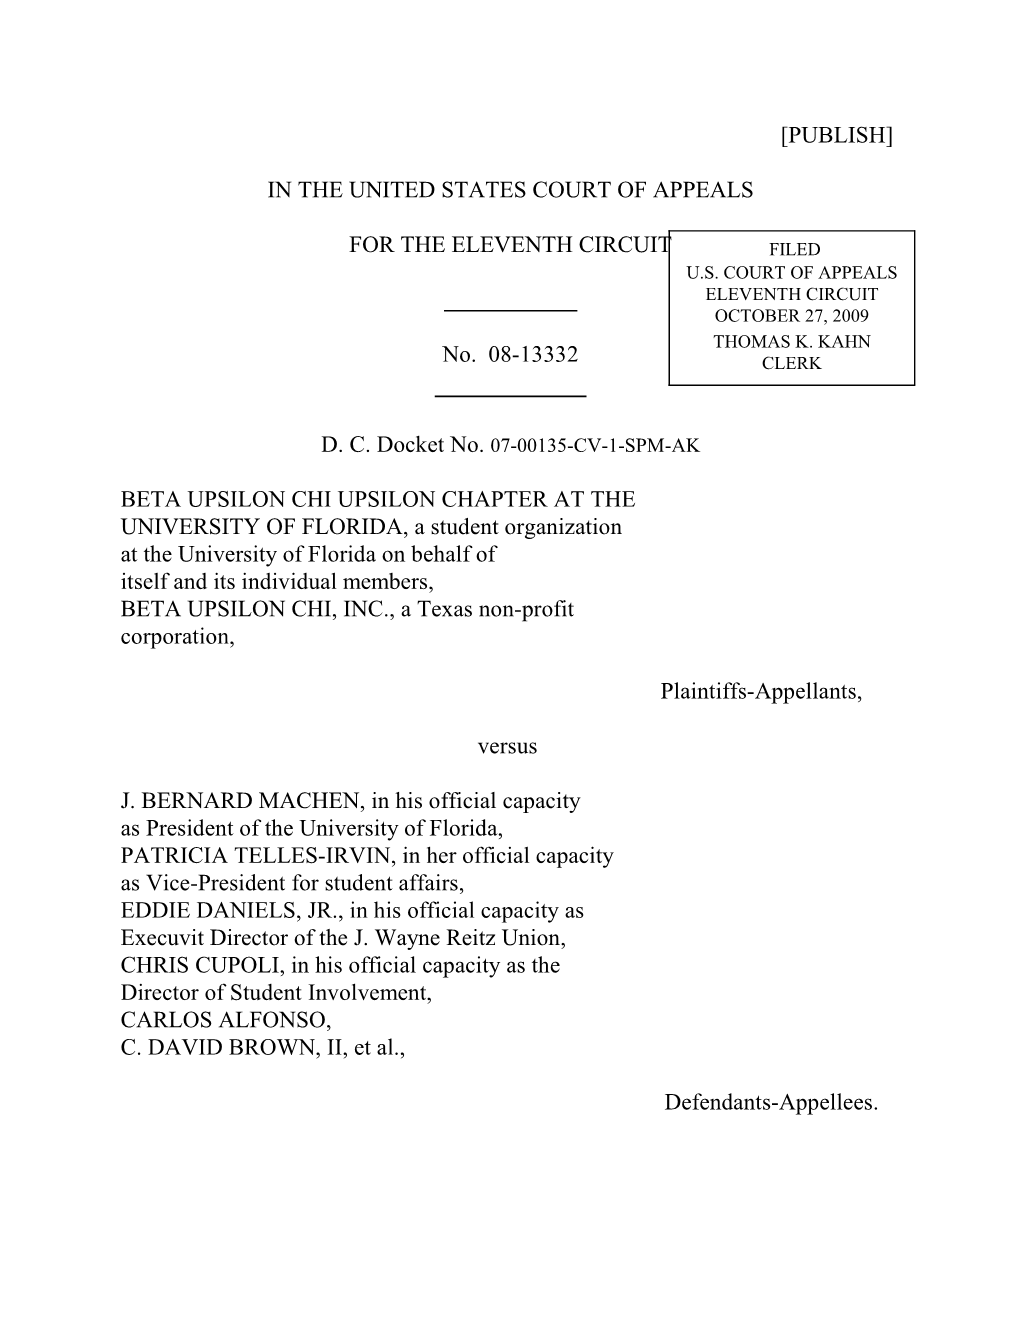 [PUBLISH] in the UNITED STATES COURT of APPEALS for the ELEVENTH CIRCUIT No. 08-13332 BETA UPSILON CHI UPSILON CHAPTER at the U